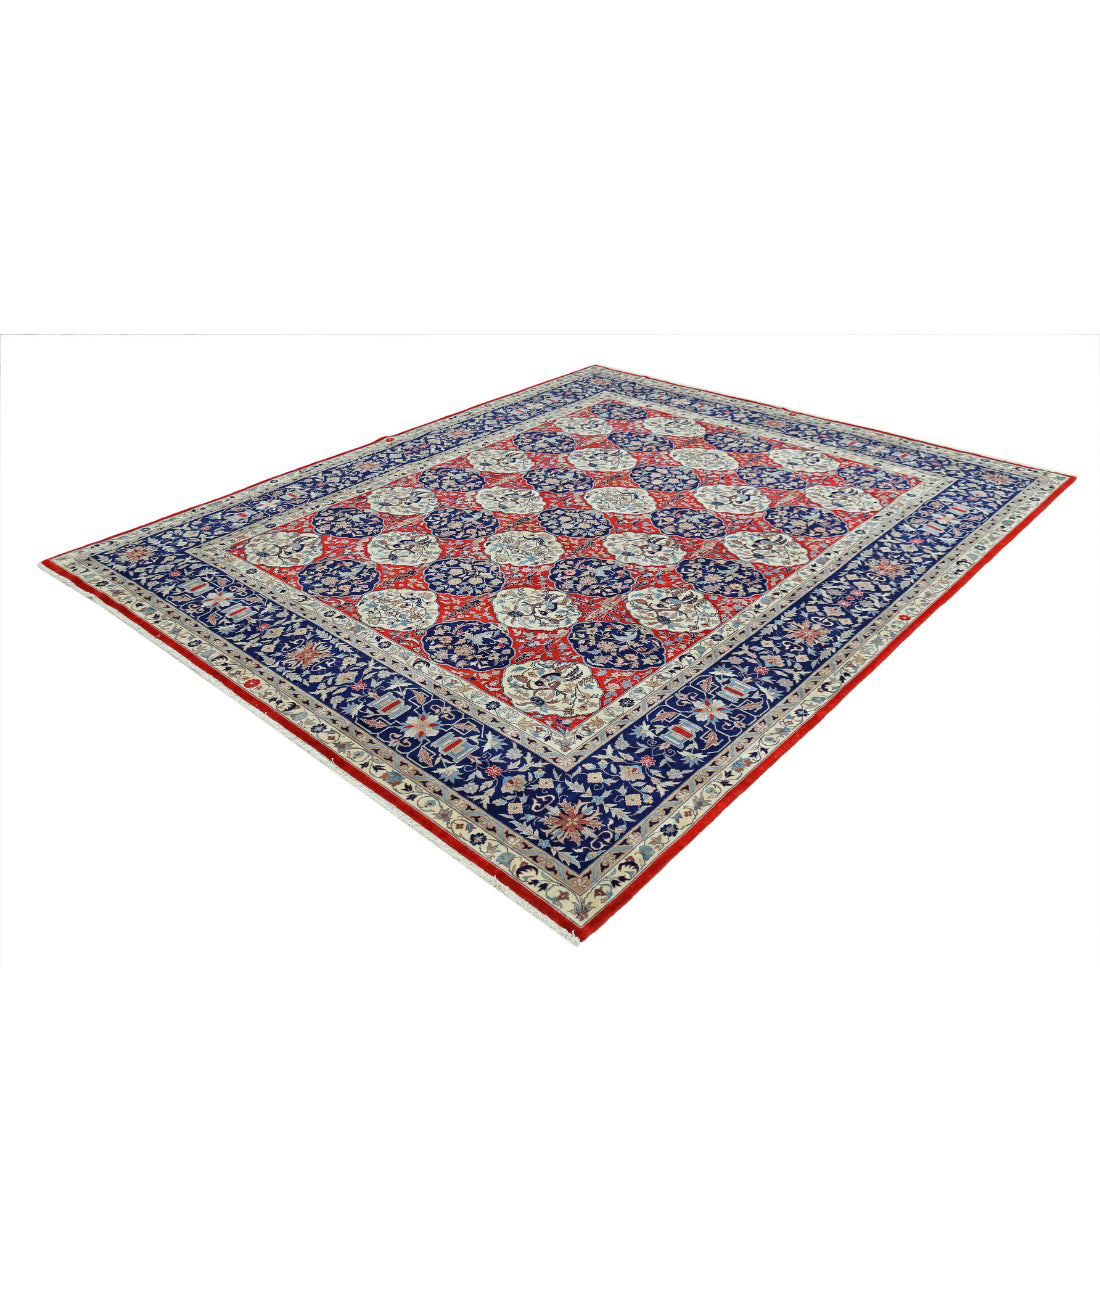 Hand Knotted Heritage Fine Persian Style Wool Rug - 8'1'' x 10'0'' 8'1'' x 10'0'' (243 X 300) / Red / Blue